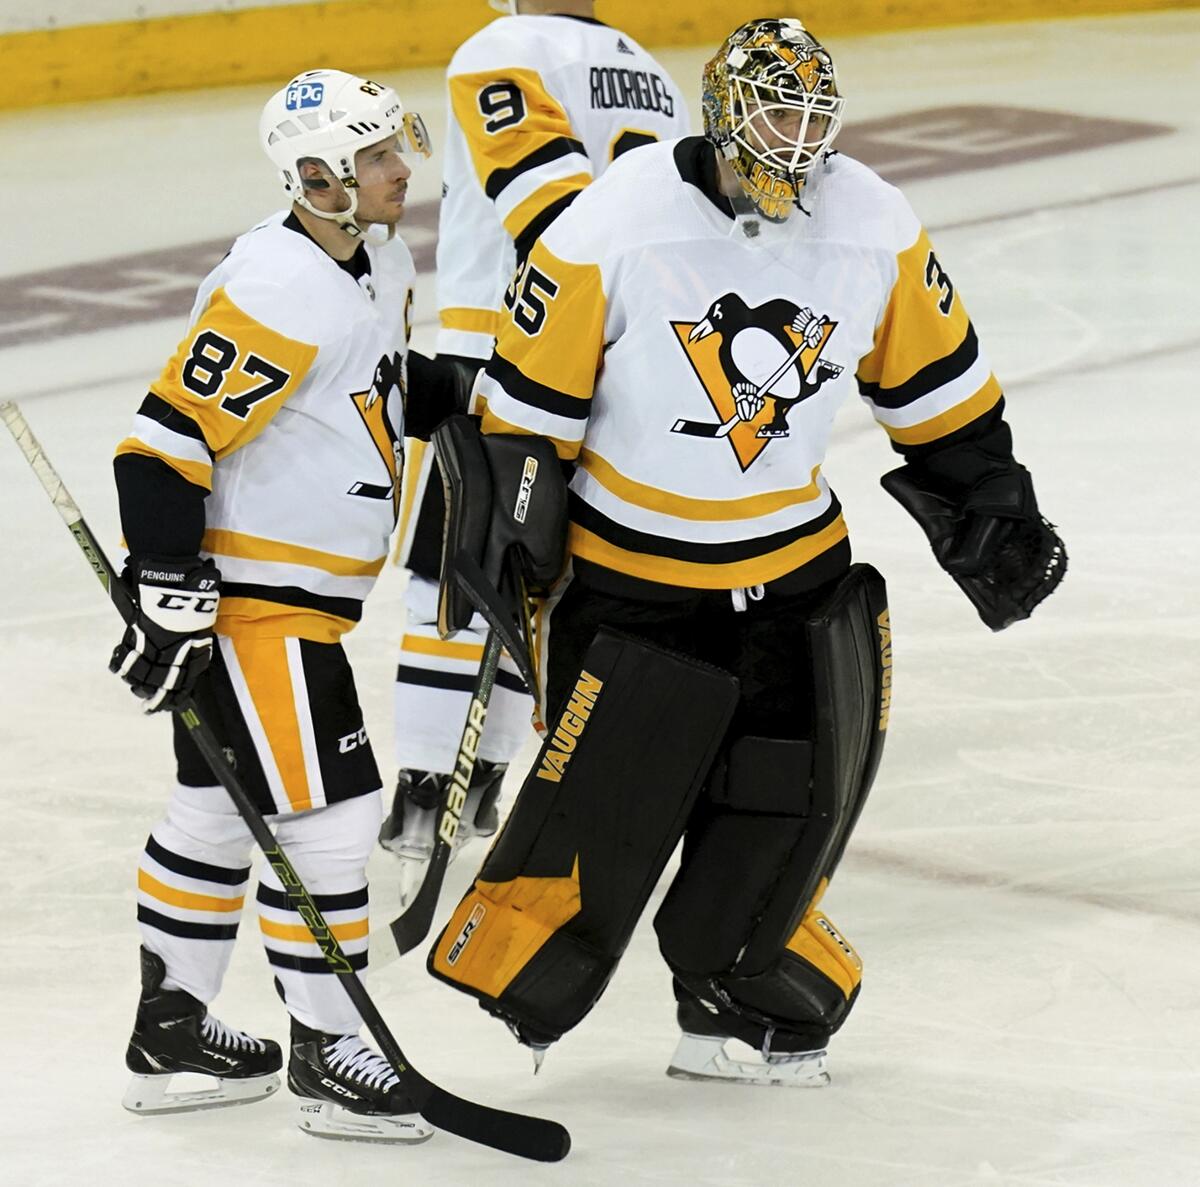 Penguins Not Counting Out Crosby for Start of Season - The New York Times